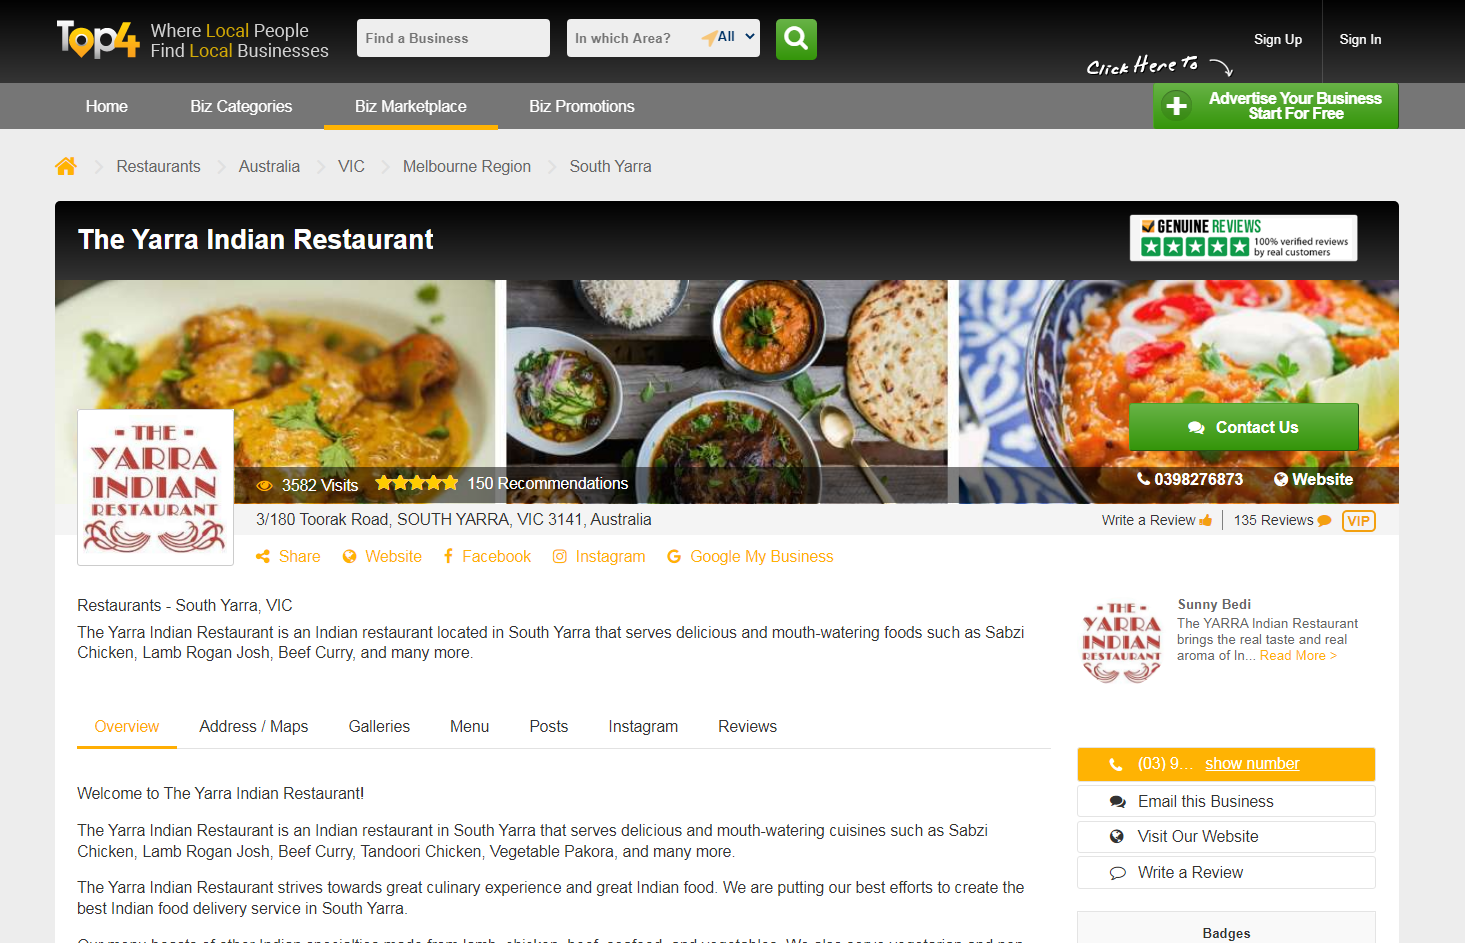 The Yarra Indian Restaurant - Top4 Listing - Top4 Marketing